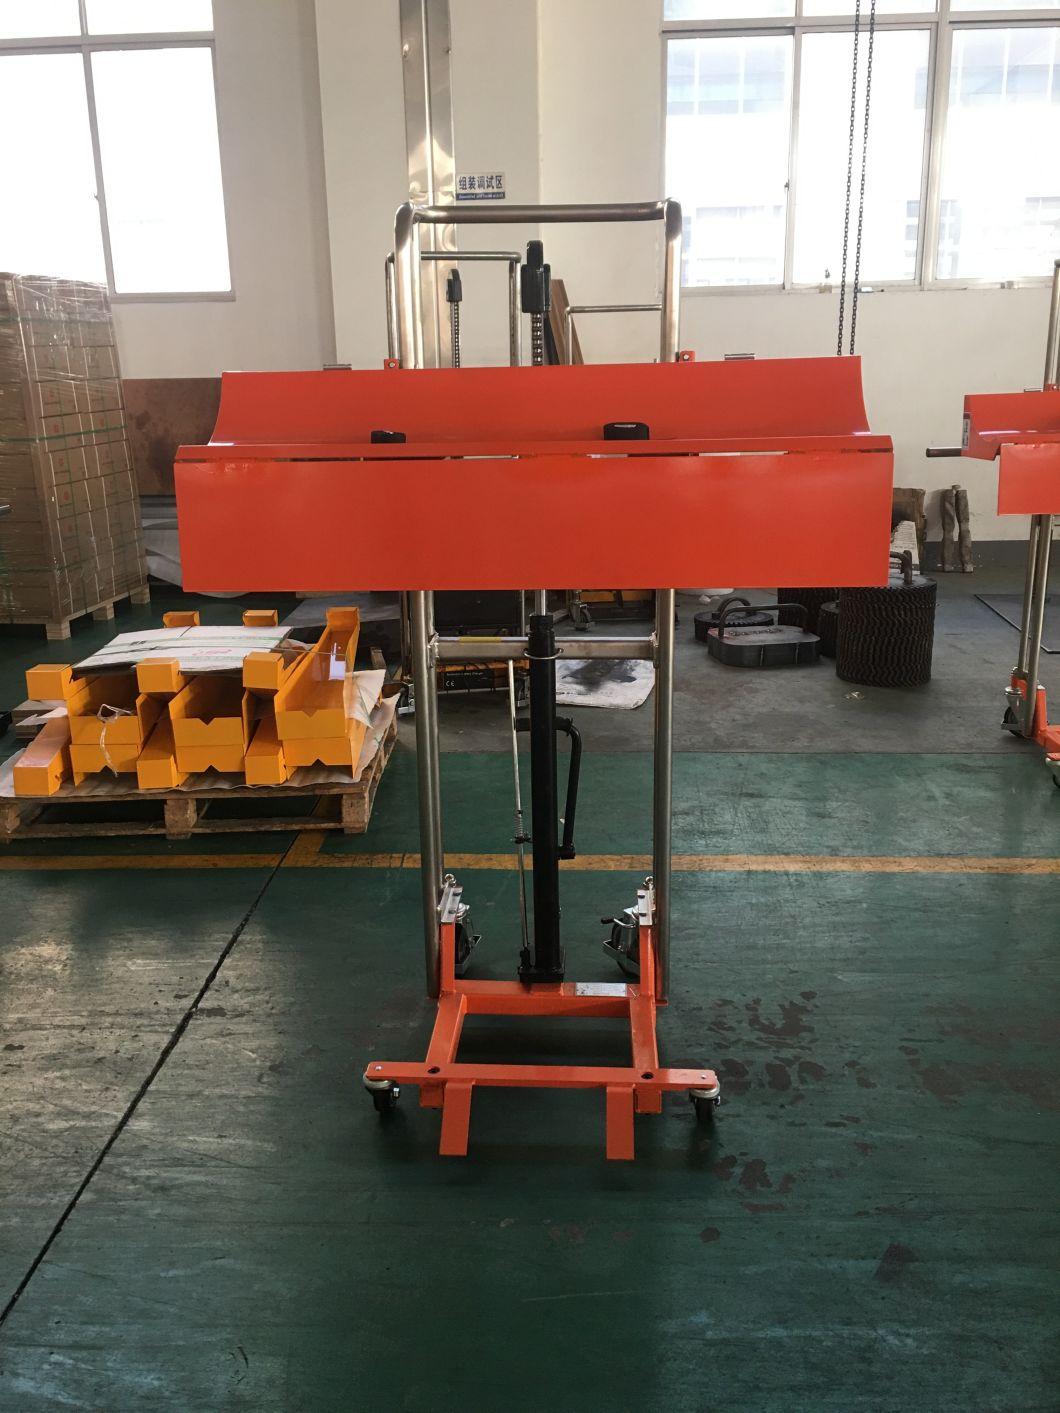 Pedal Type Roll Lifter with 400kg Load for Upper and Lower Materials